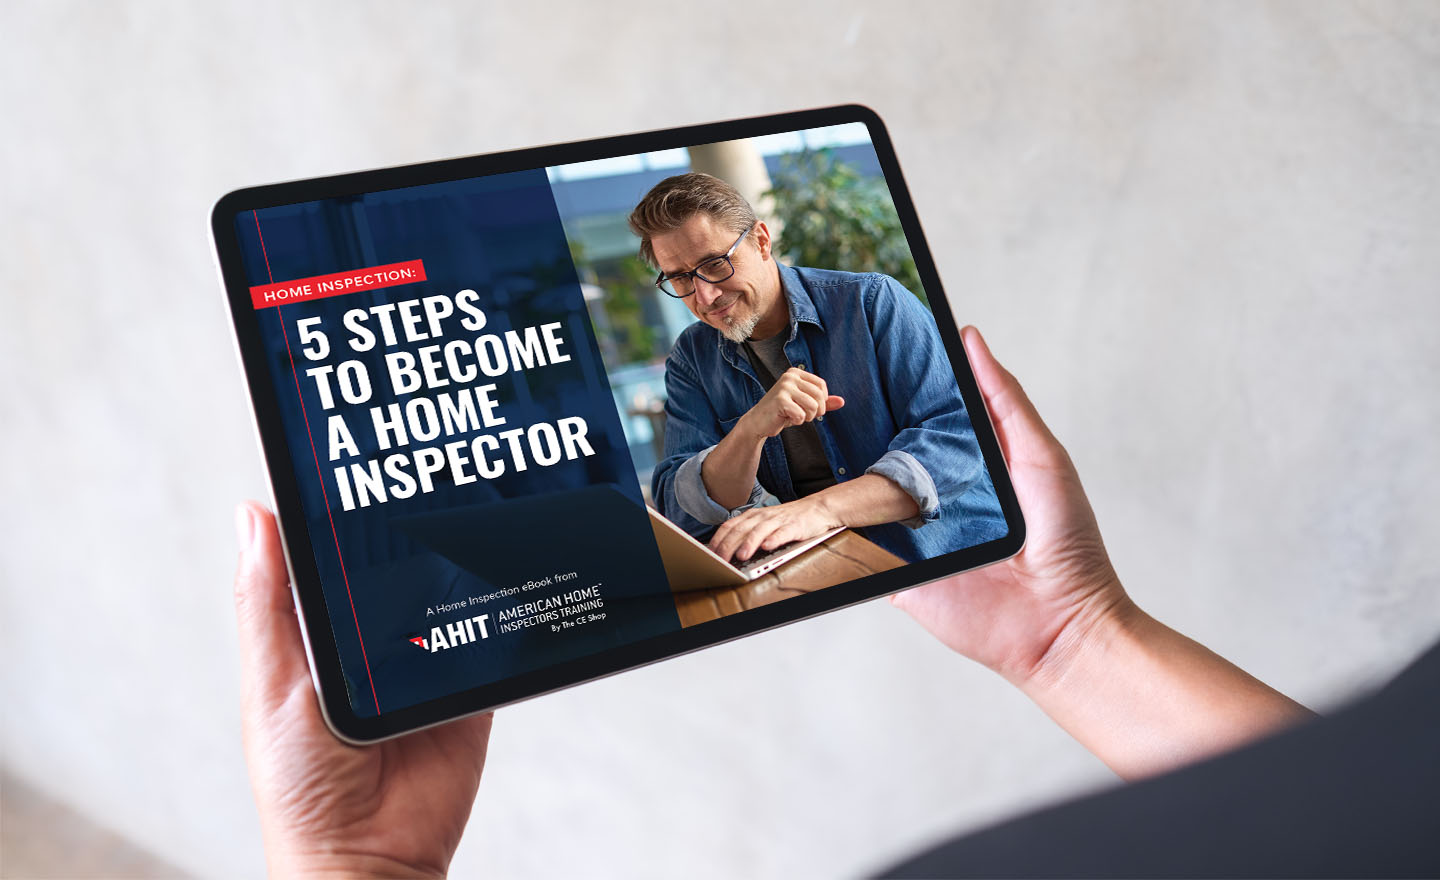 5 steps to becoming a home inspector ebook image